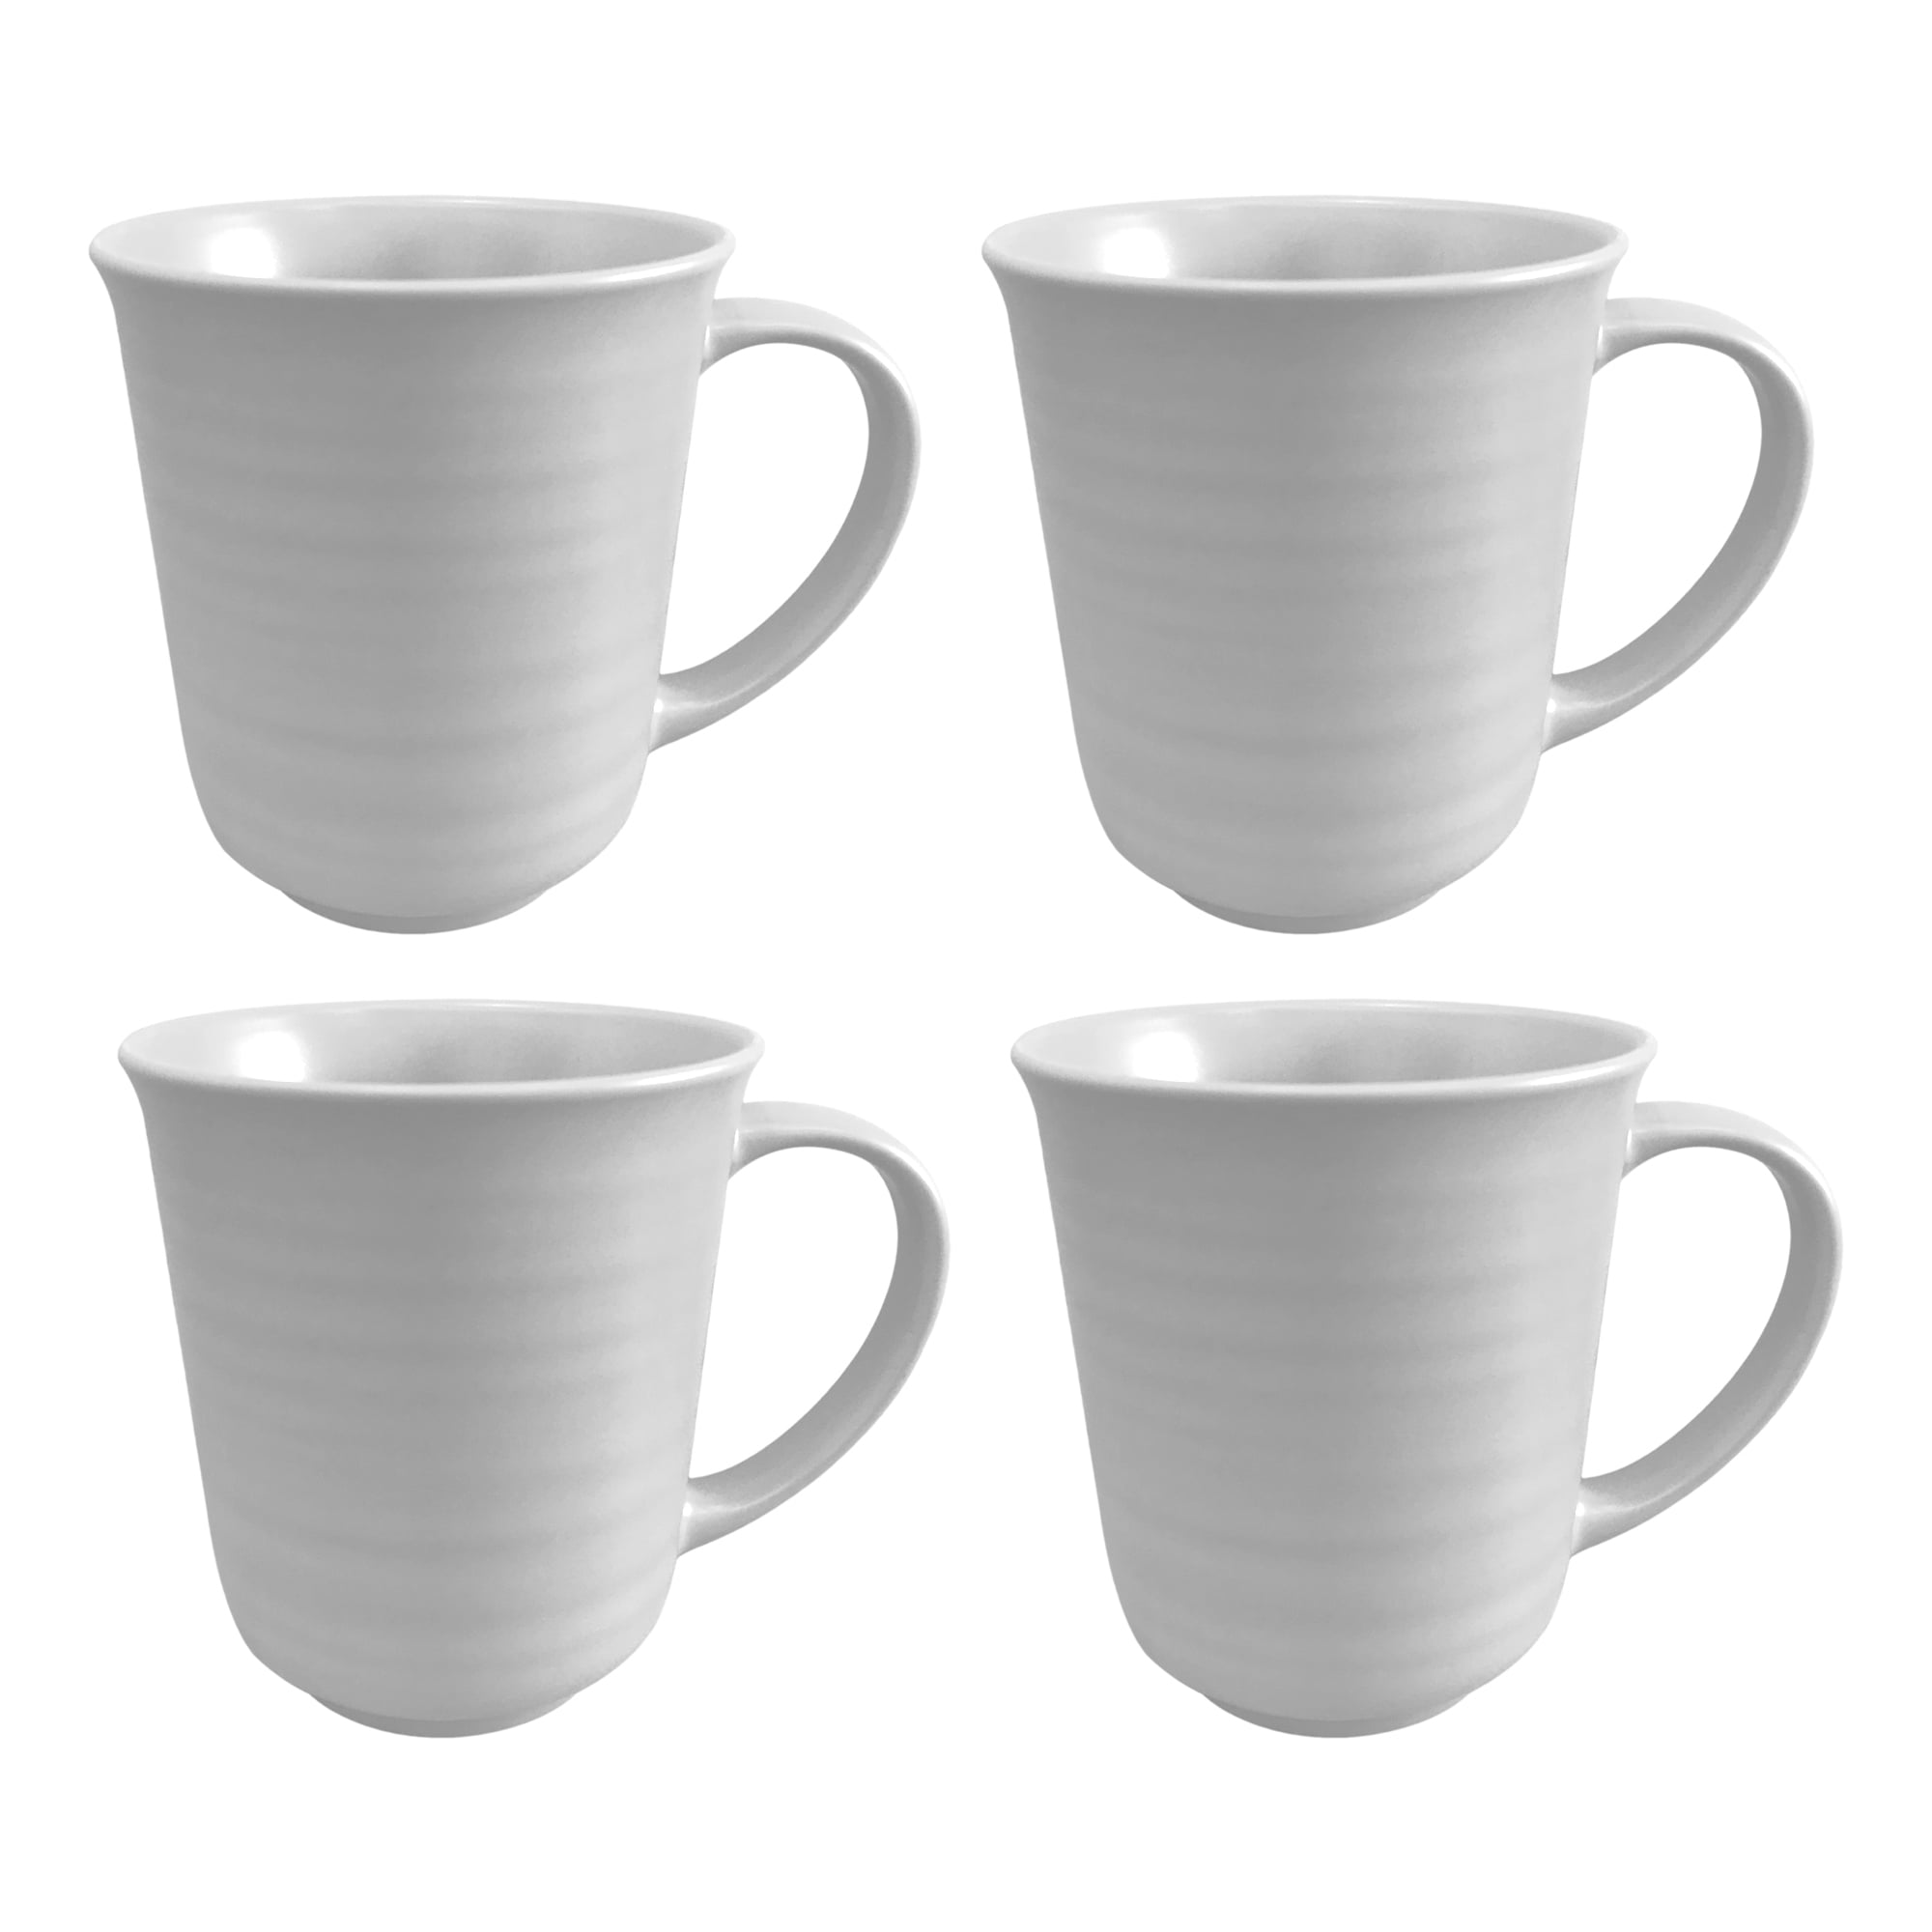 LIFVER 20 oz Coffee Mugs Set of 4, Speckled Big White Mugs with Large  Handles for